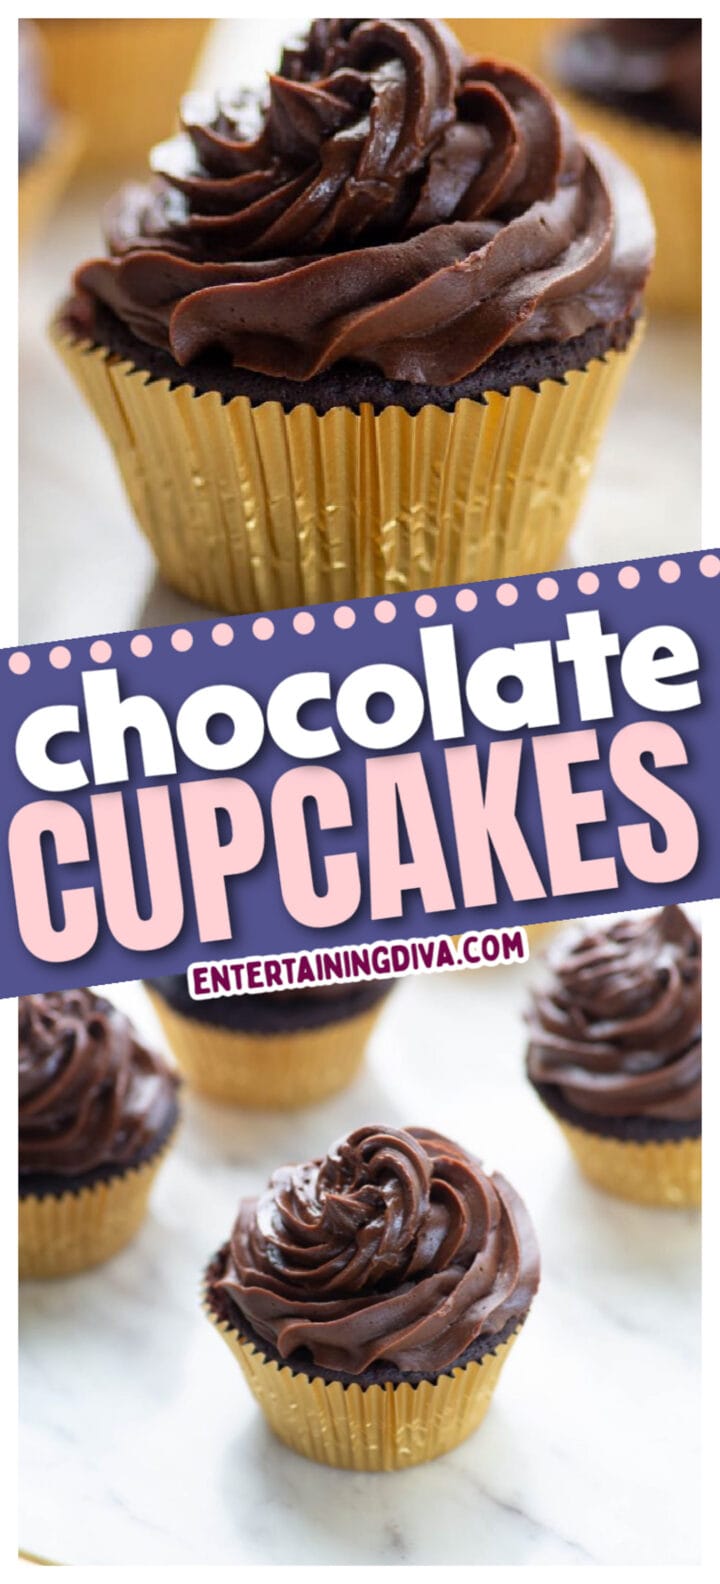 Chocolate Cupcakes Recipe (with a Gluten-Free version)